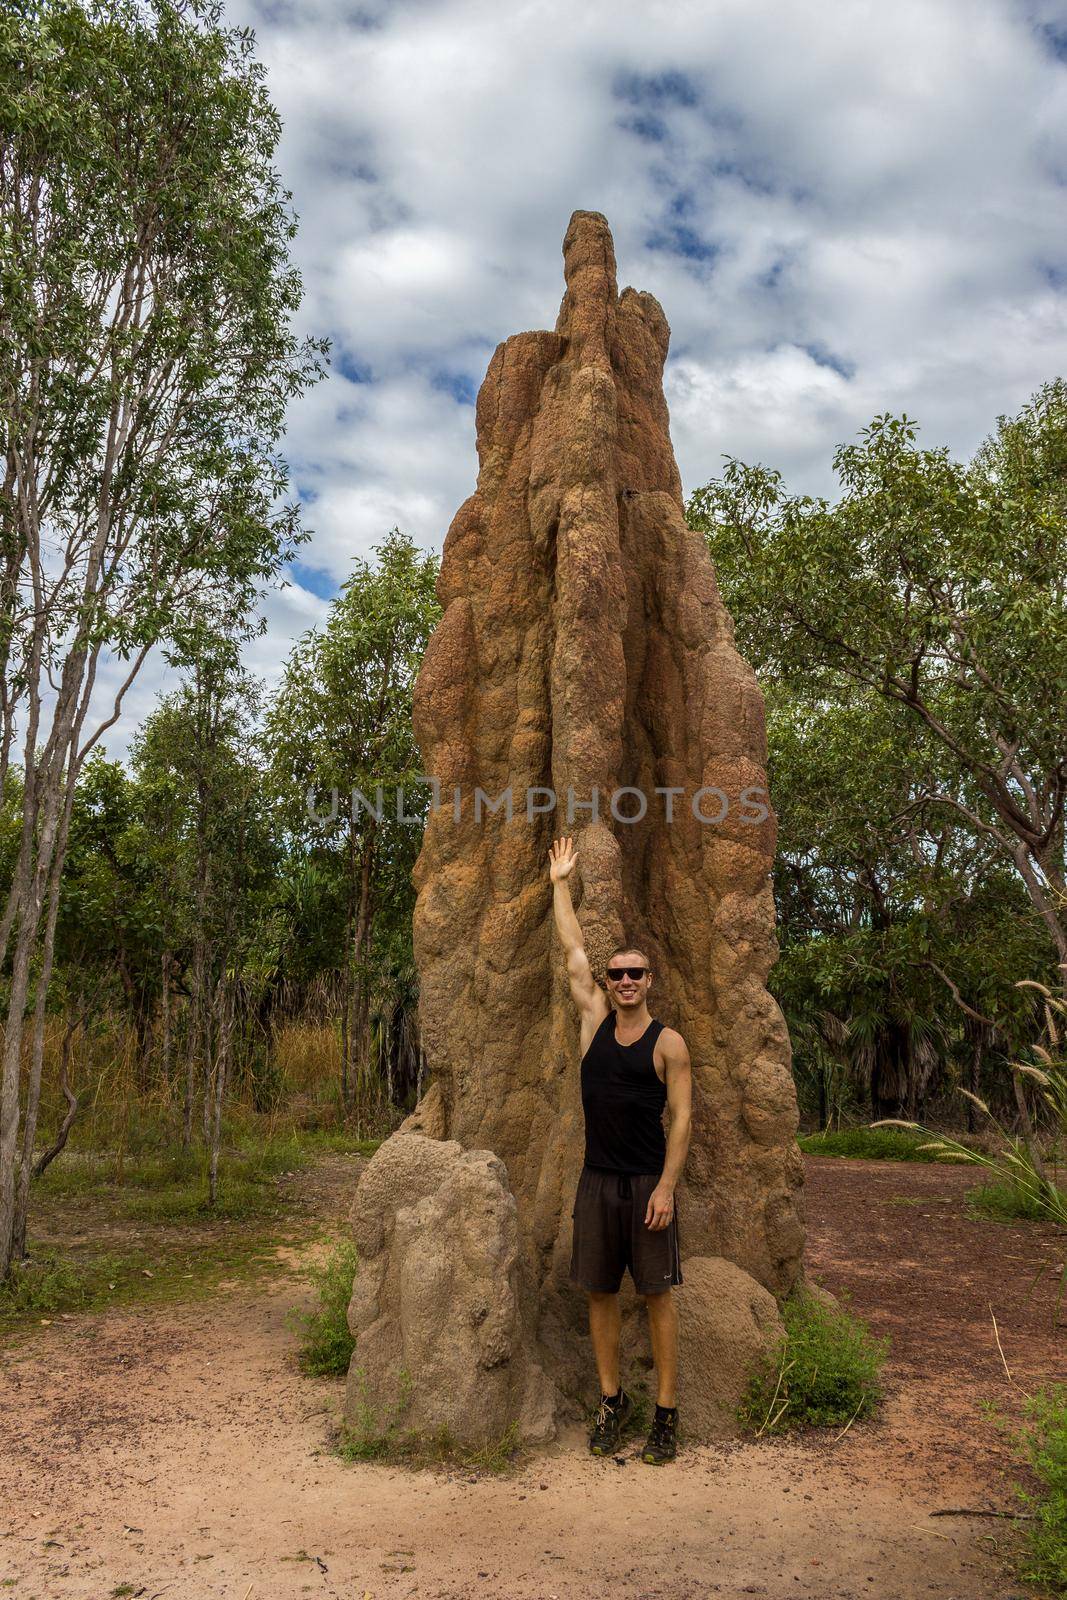 Termite Mound in Litchfield National Park, Northern Territory